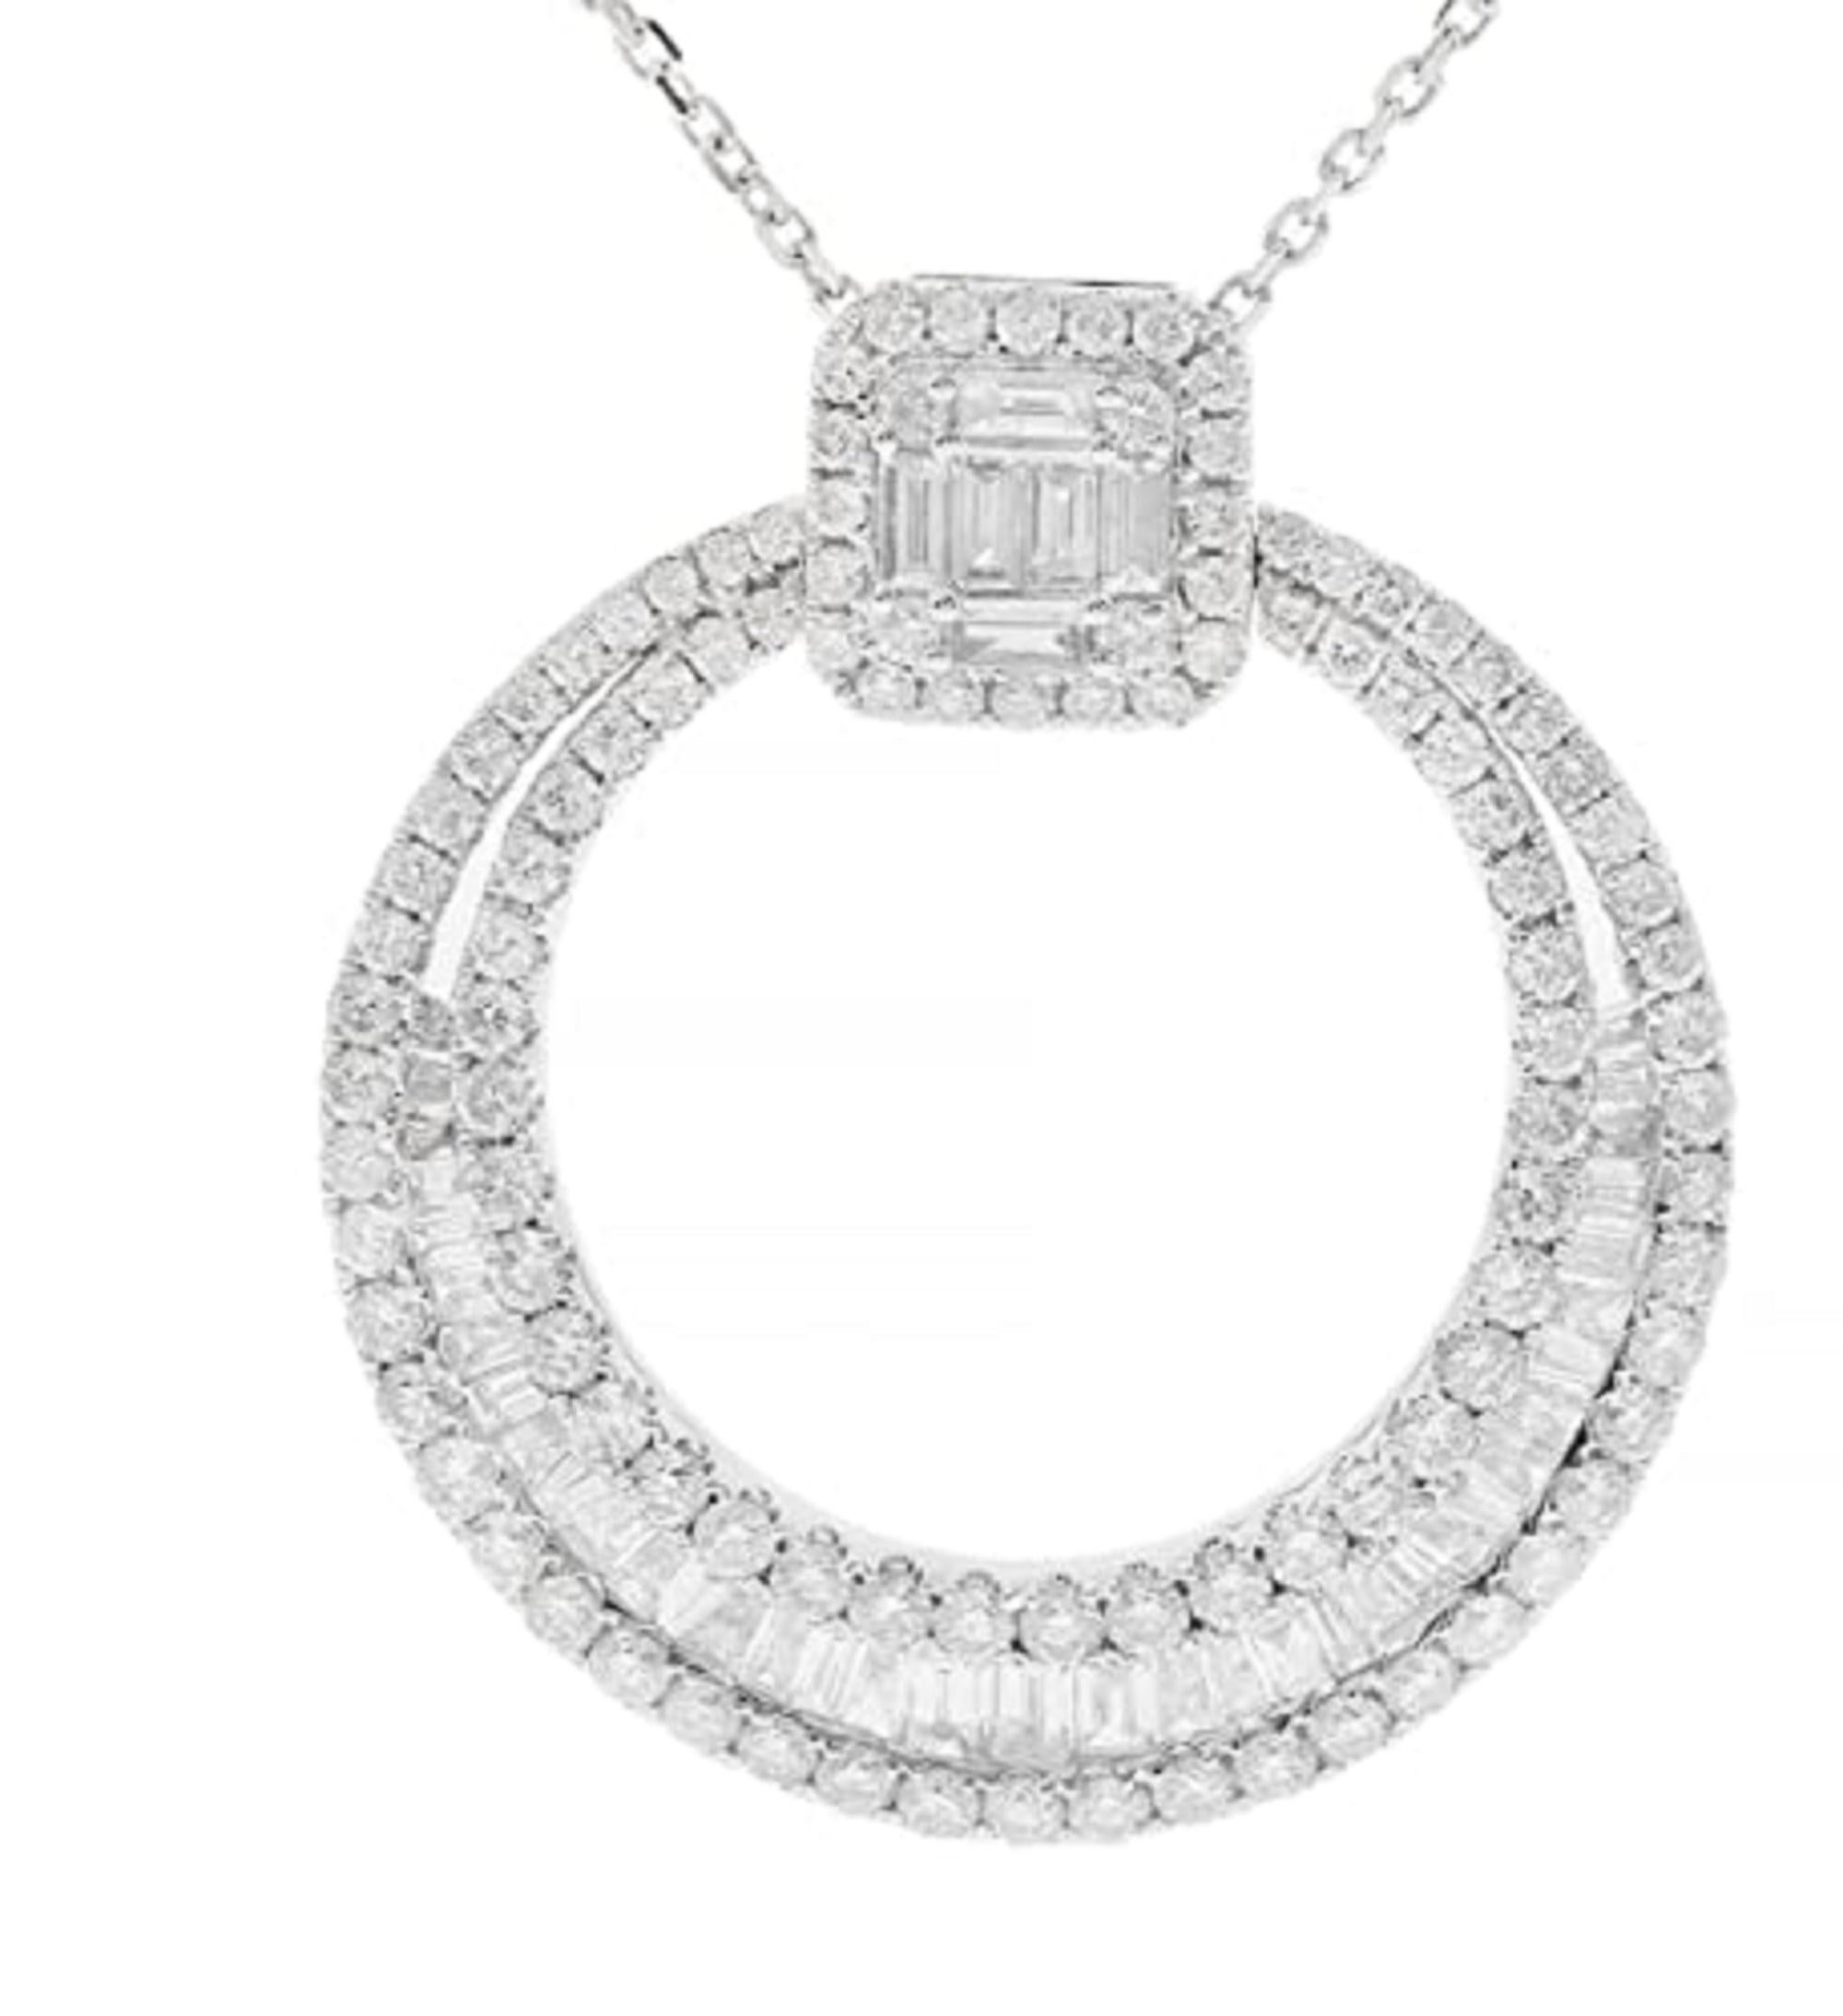 Decorate yourself in elegance with this Pendant is crafted from 14-karat White Gold by Gin & Grace. This Pendant is Baguette-cut White Diamond (44 Pcs) 0.72 Carat and Round-cut White Diamond (111 Pcs) 1.13 Carat. This Pendant is weight 3.98 grams